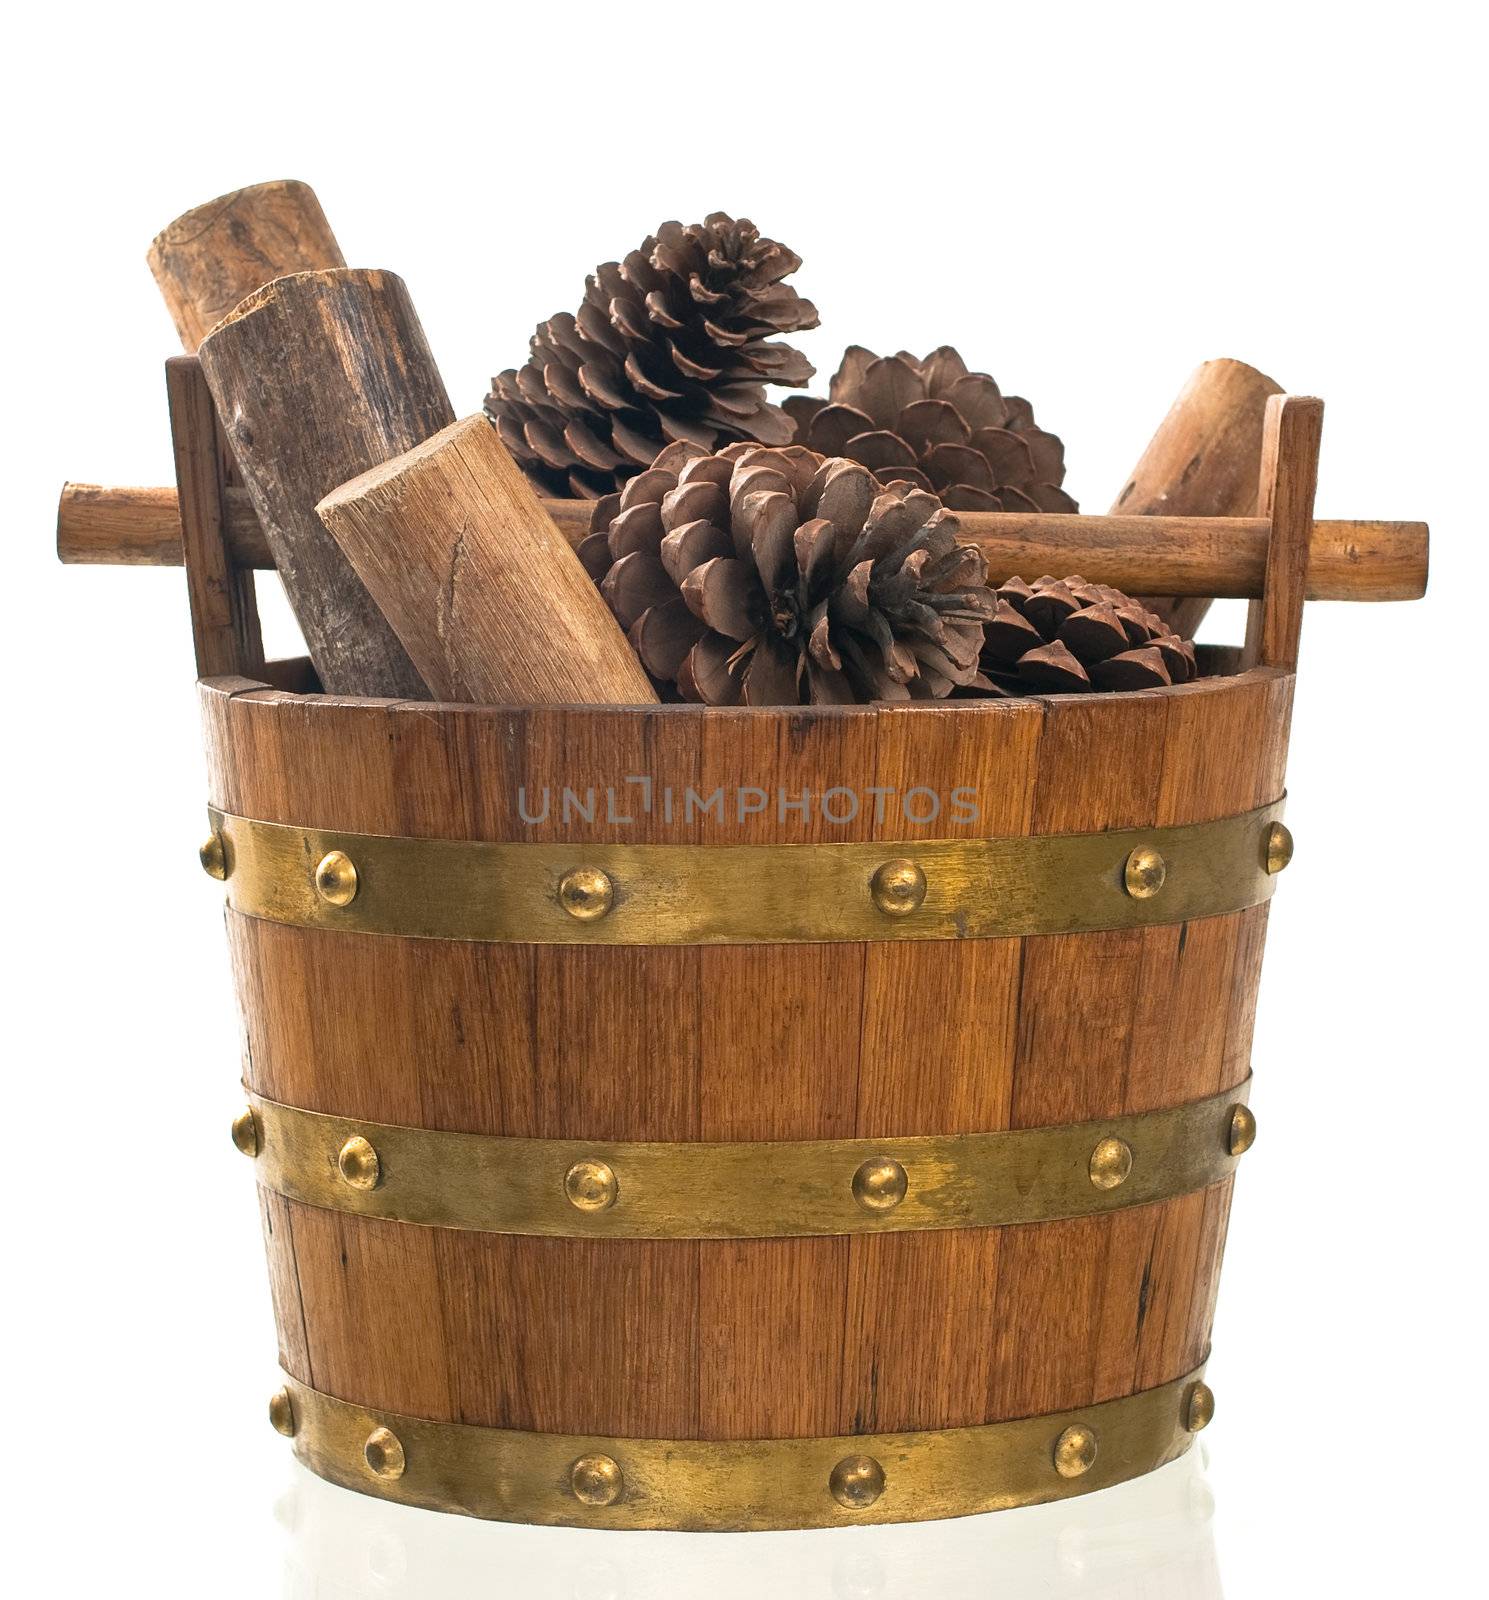 Basket with pine and wood isolated on white standing on a reflective surface.